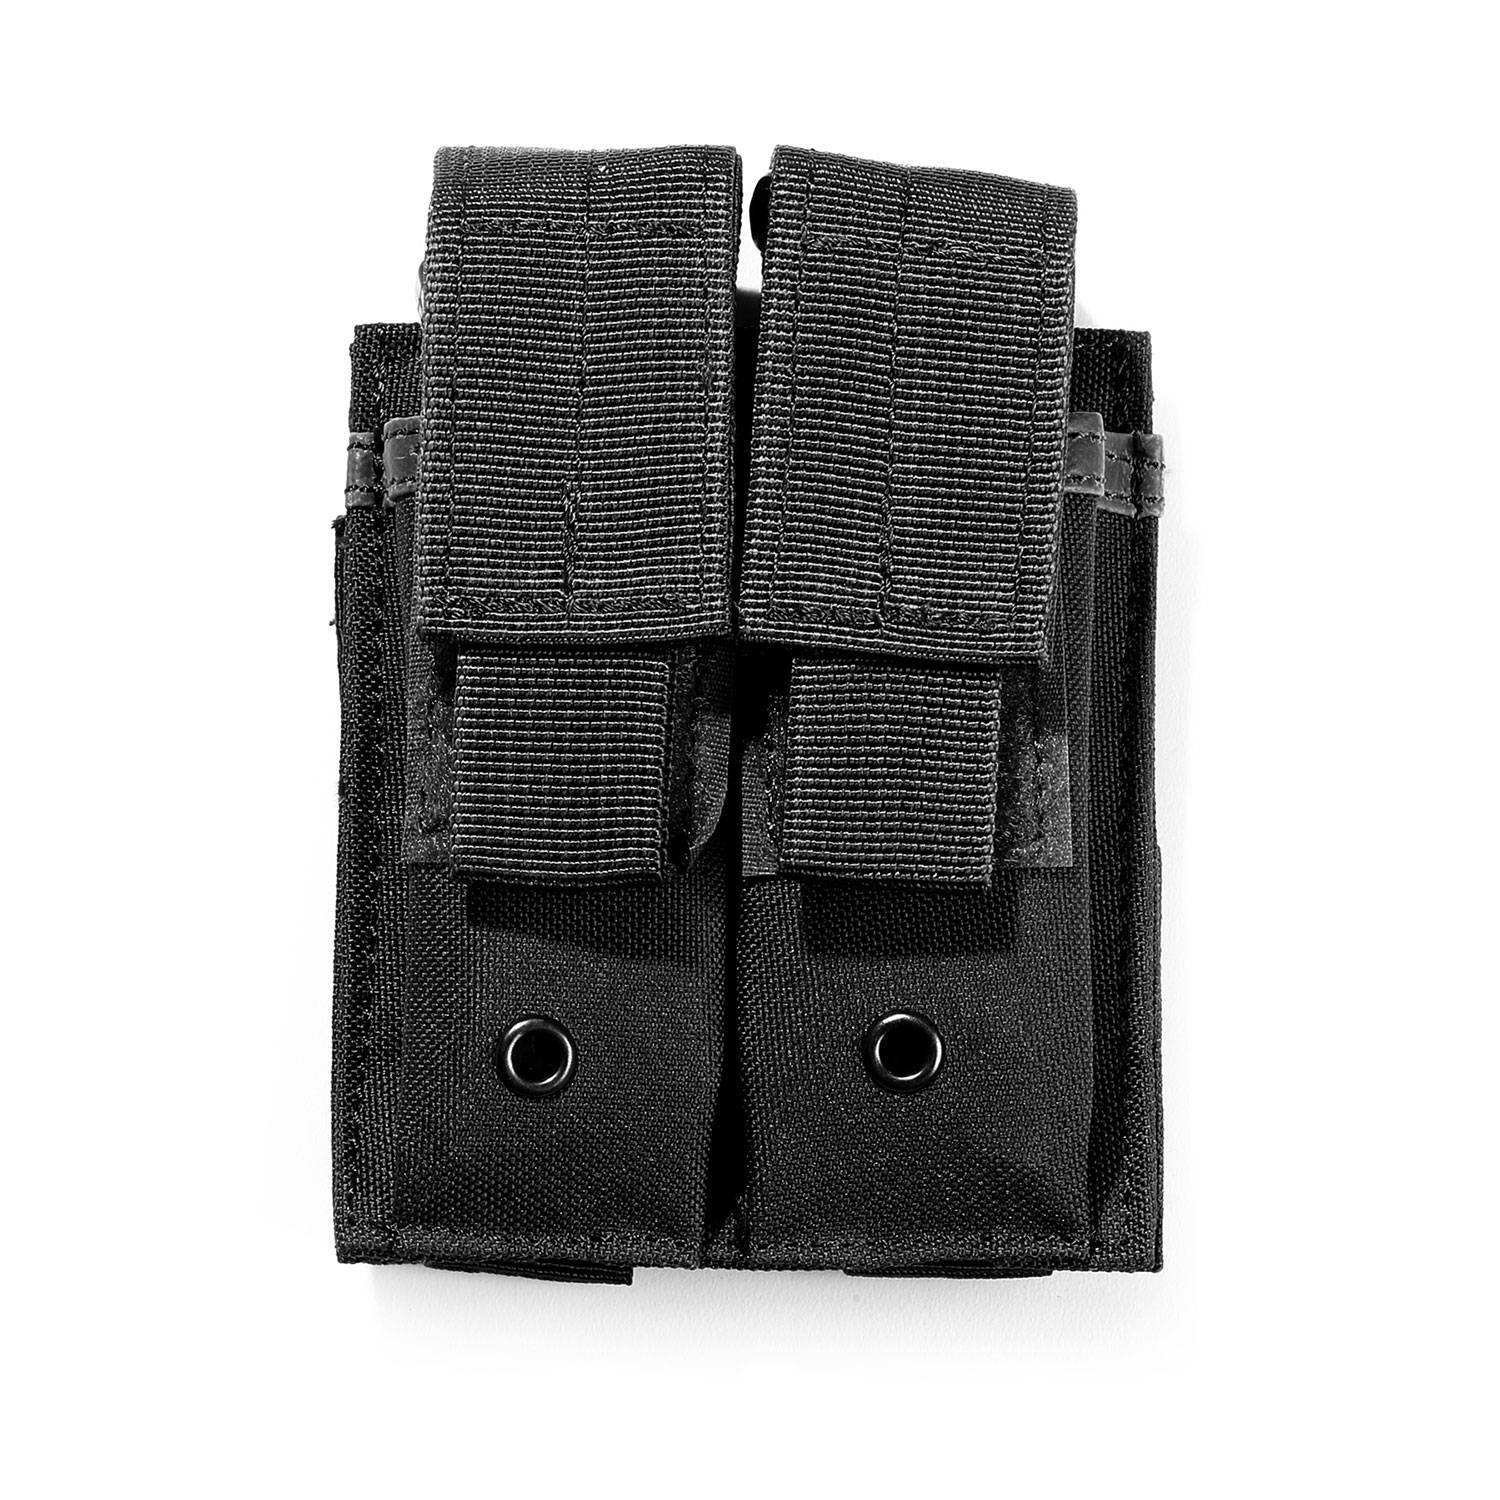 5IVE STAR GEAR DOUBLE PISTOL MAG POUCH